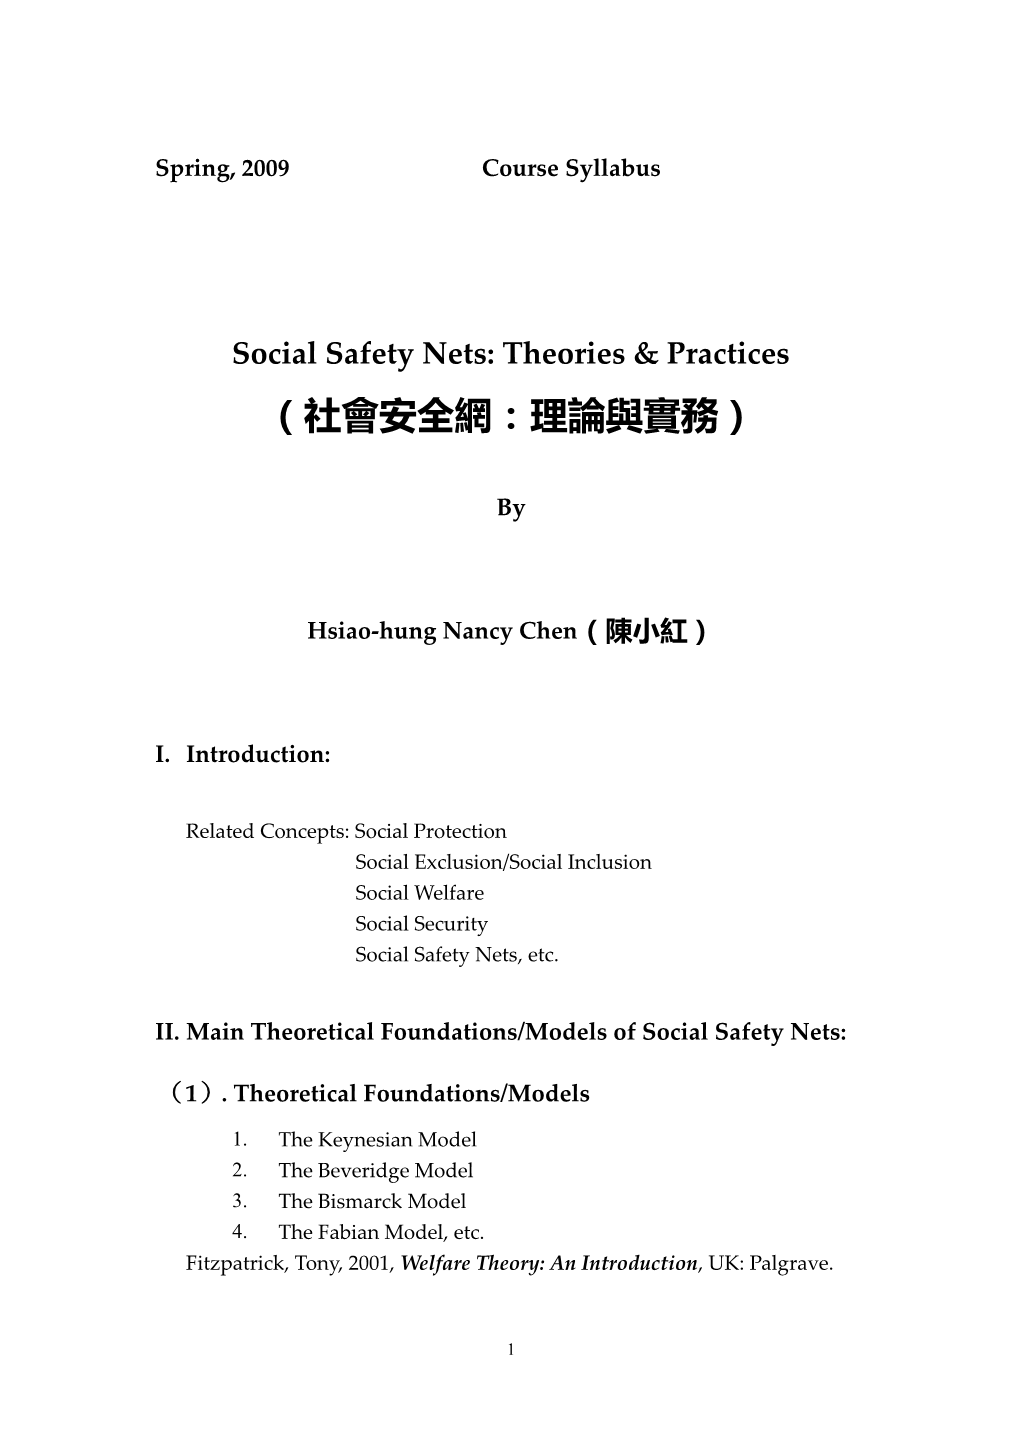 Social Safety Nets: Theories & Practices